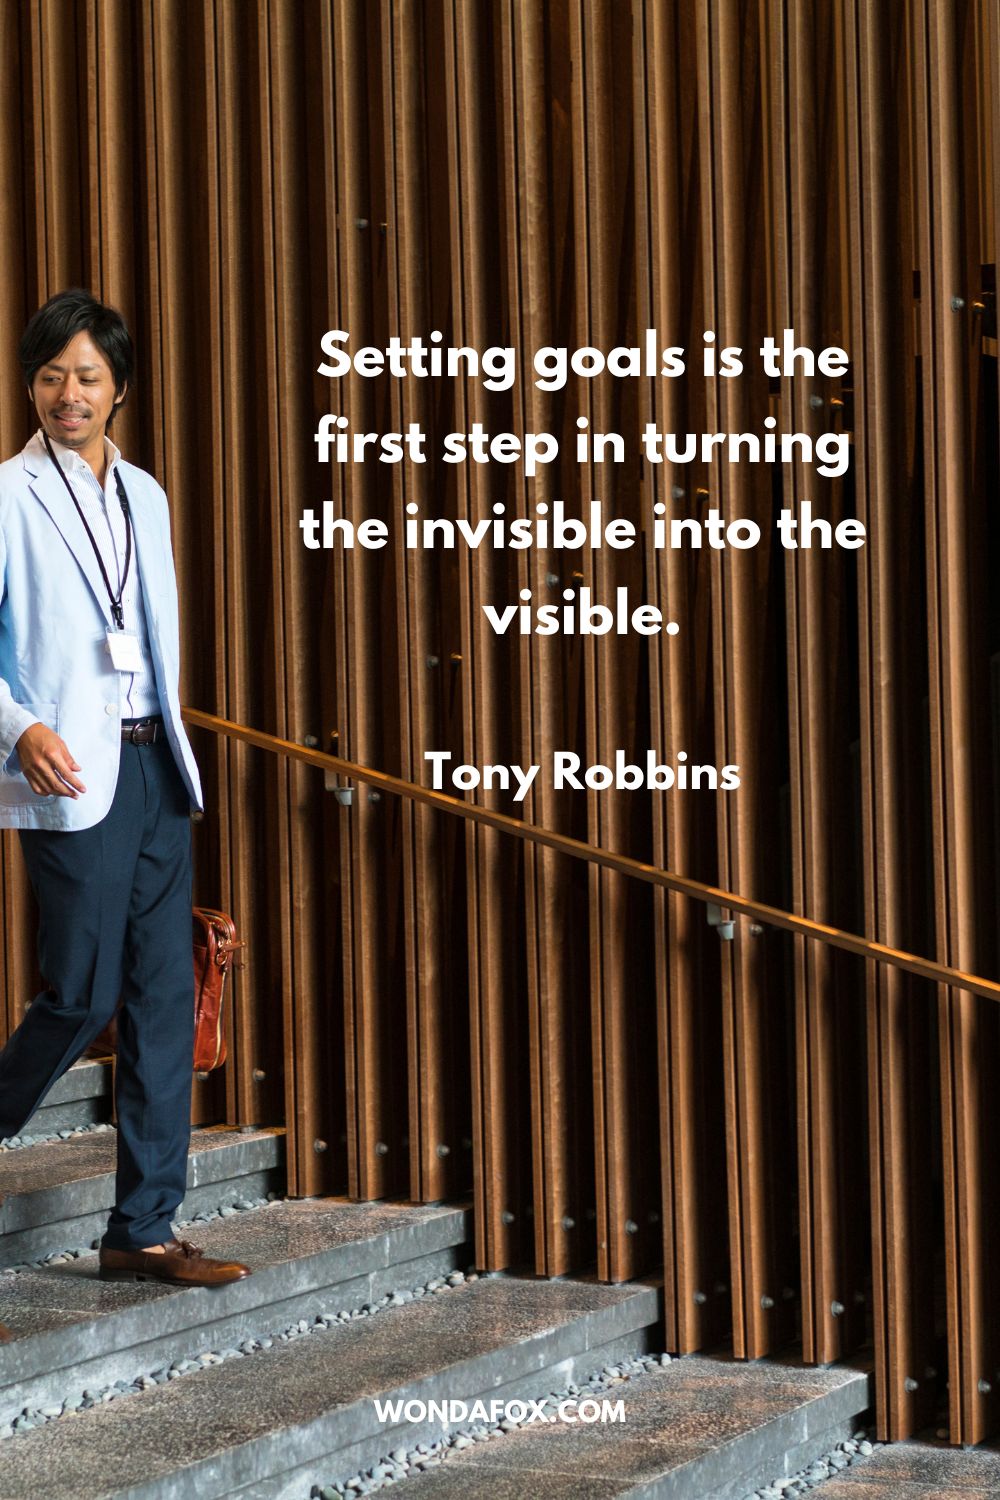 Setting goals is the first step in turning the invisible into the visible. Tony Robbins